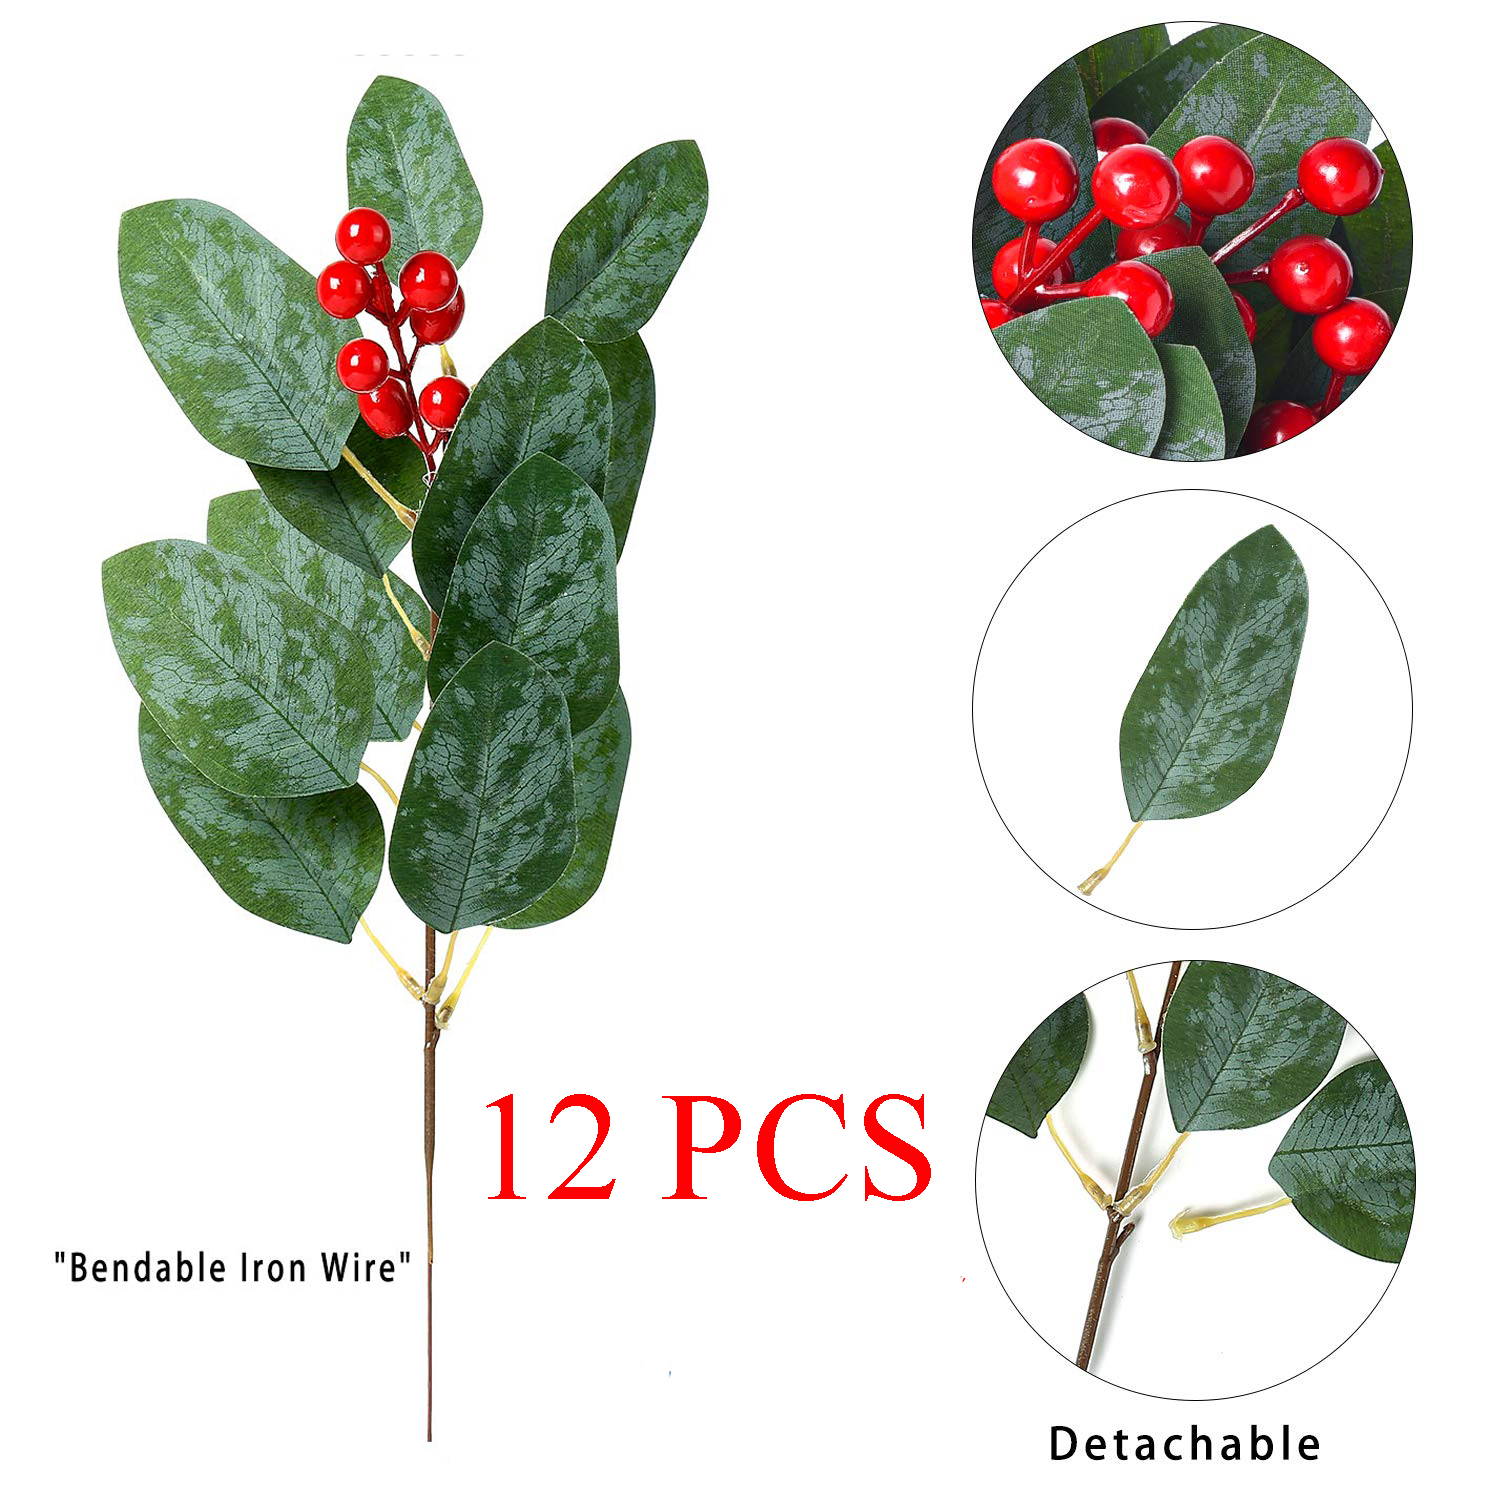 Yhdsn 12 Pcs Artificial Christmas Red Berry Picks Holly Berries Flower Stem Needles Branches Fake Greenery Floral Picks Arrangements for Xmas Wreath